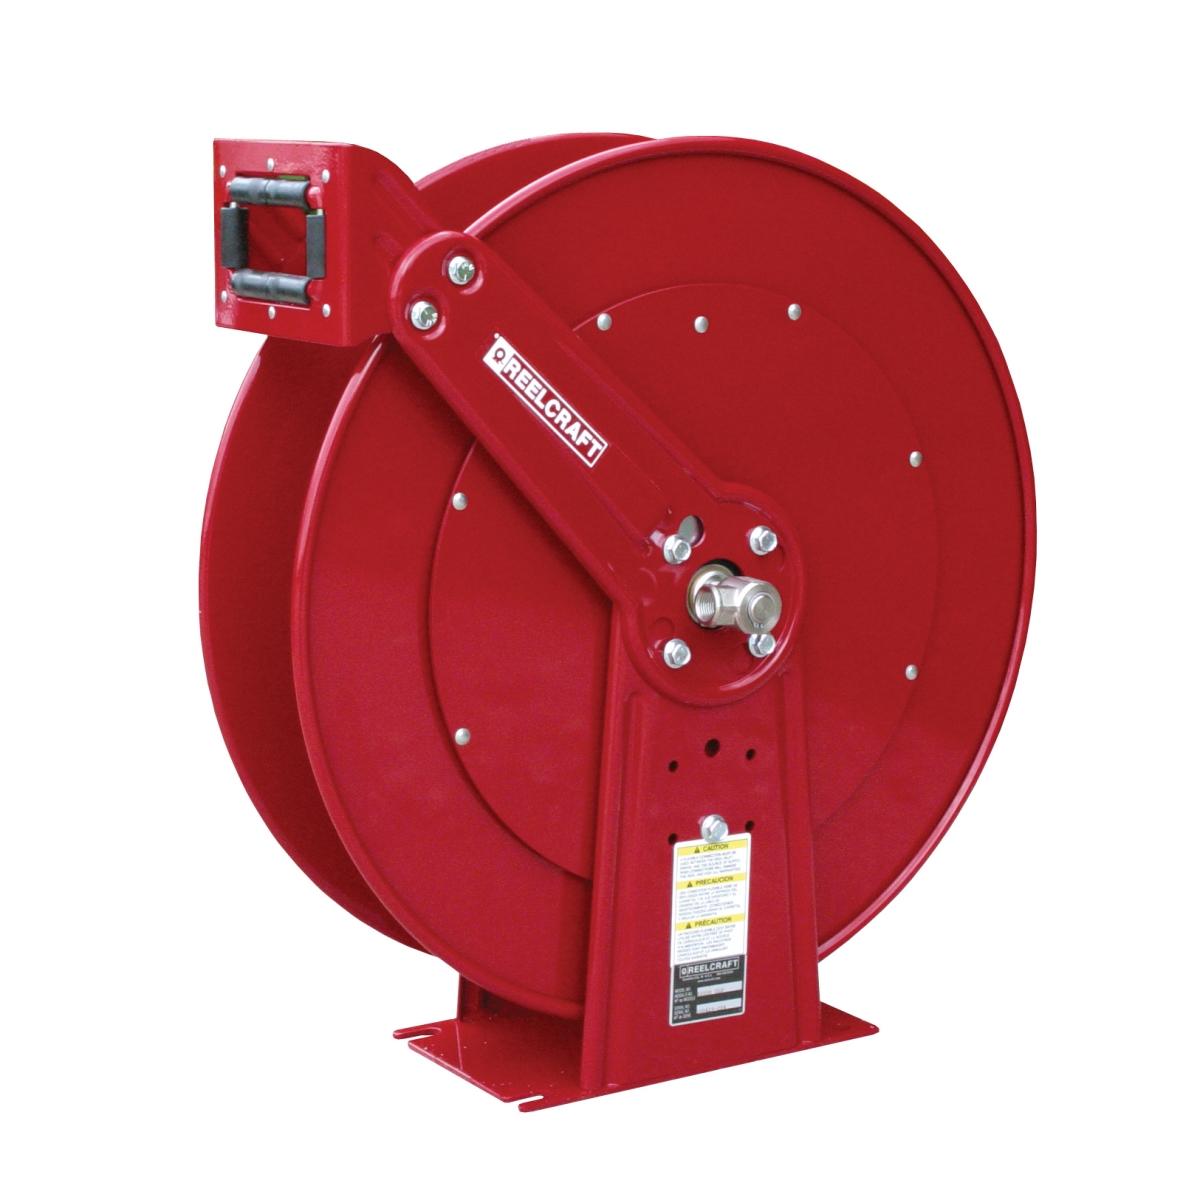 82000 Omp 0.5 In. X 75 Ft. Heavy Duty 2000 Psi Oil Without Hose Reel, Red